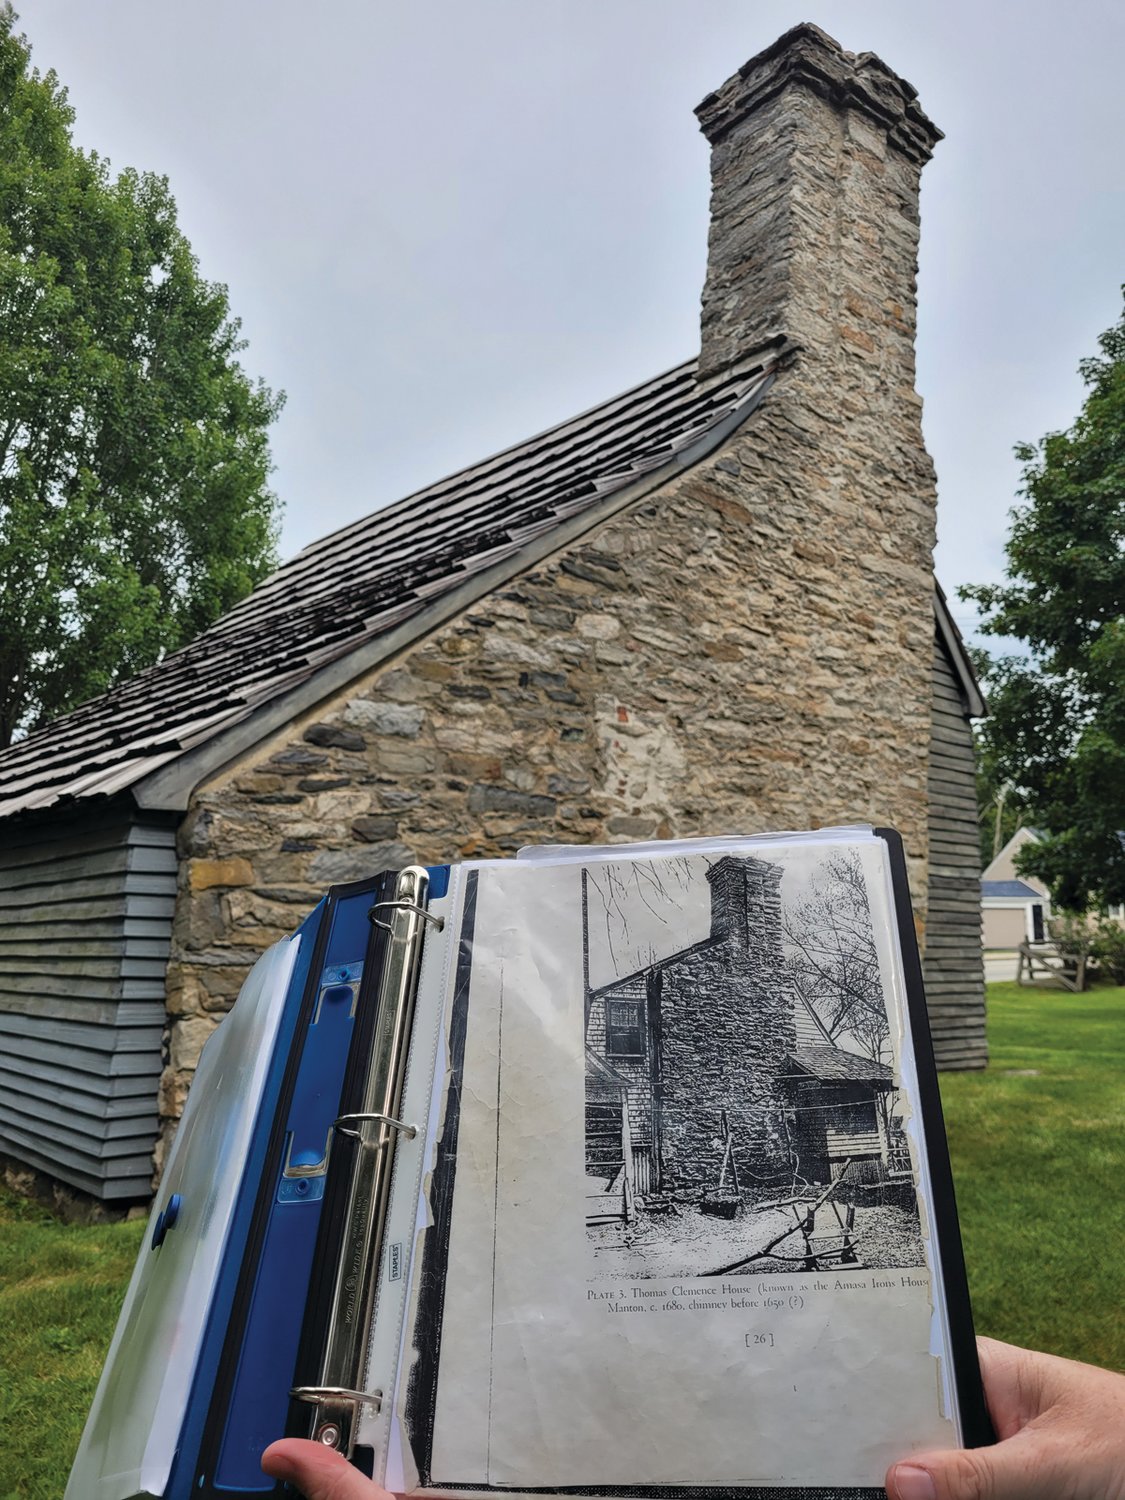 STONE-ENDER: The Clemence-Irons House is a rare surviving ‘stone-ender,’ a type of architecture used by New England’s earliest European settlers. Most houses of this type burned during King Phillip’s War. Caretaker Dan Santos holds a historical photo of the structure, showing some early additions to the home, which have since been removed.